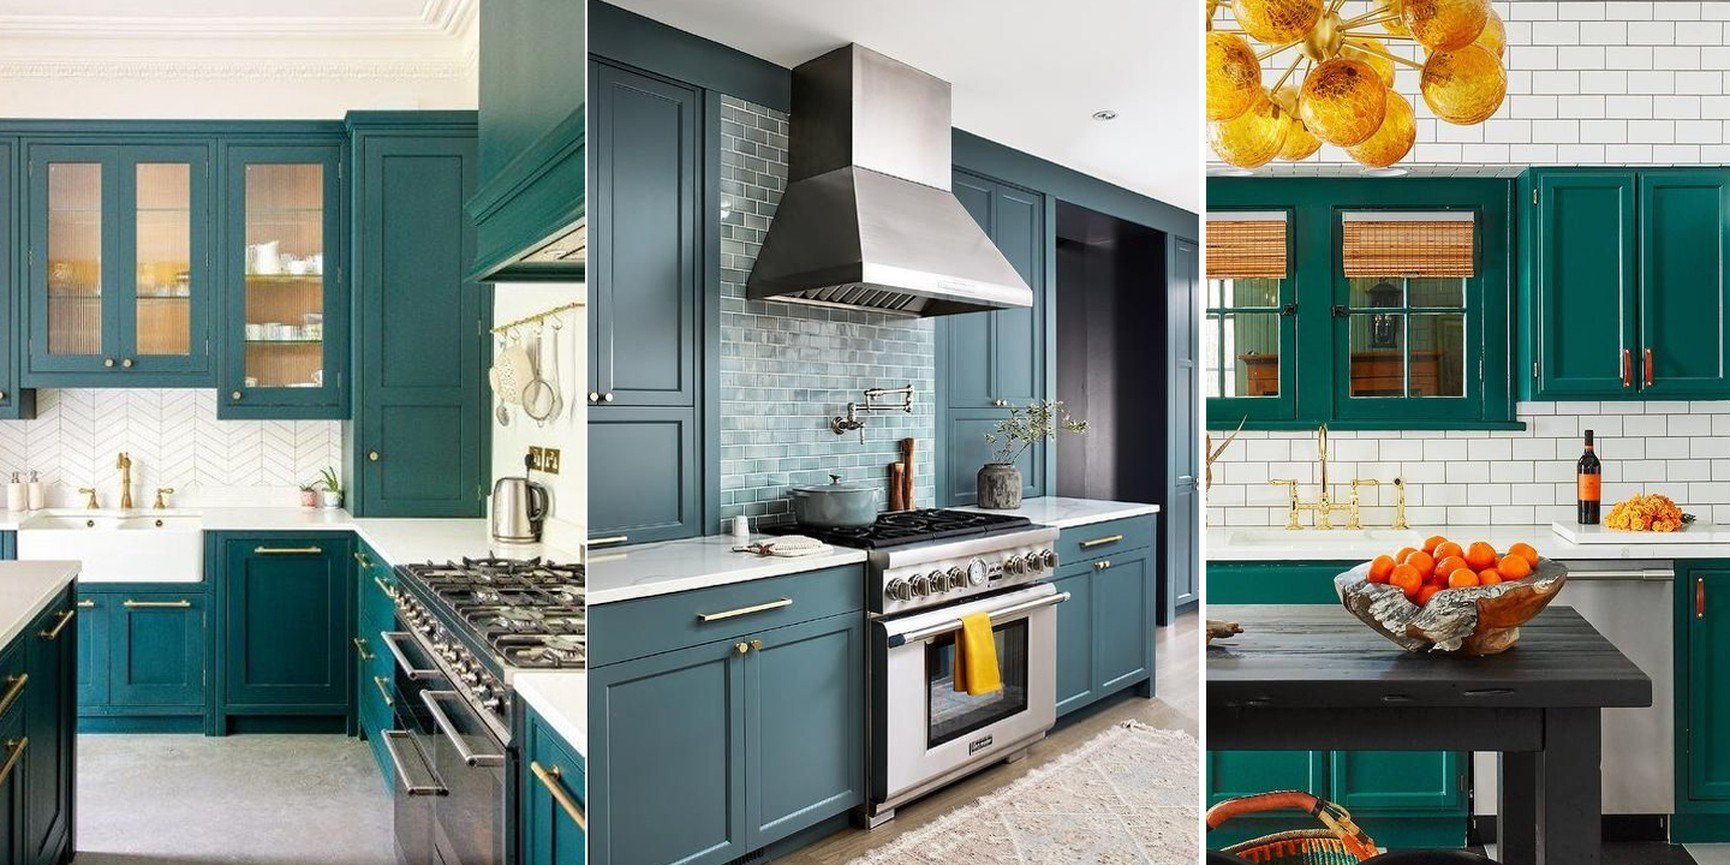 Get the look: Teal bathroom and kitchen ideas | Topps Tiles